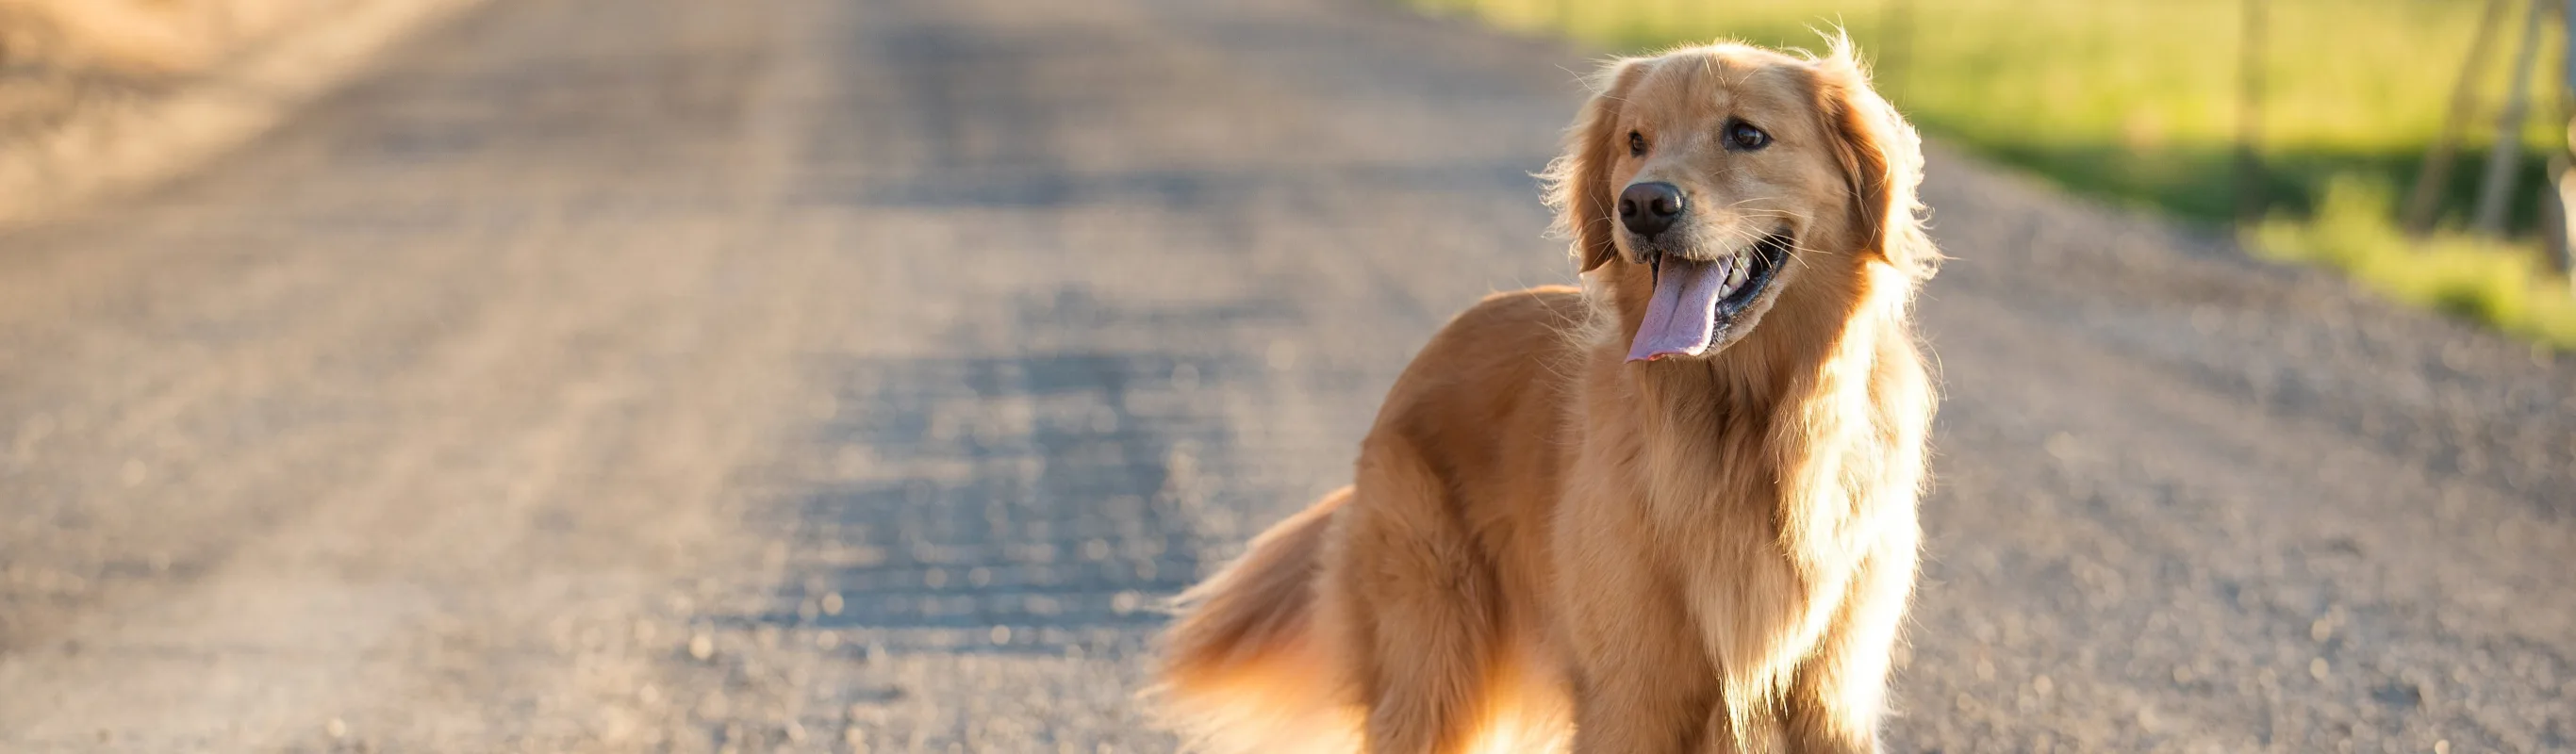 Golden Dog standing on in the middle of a gravel road and being happy